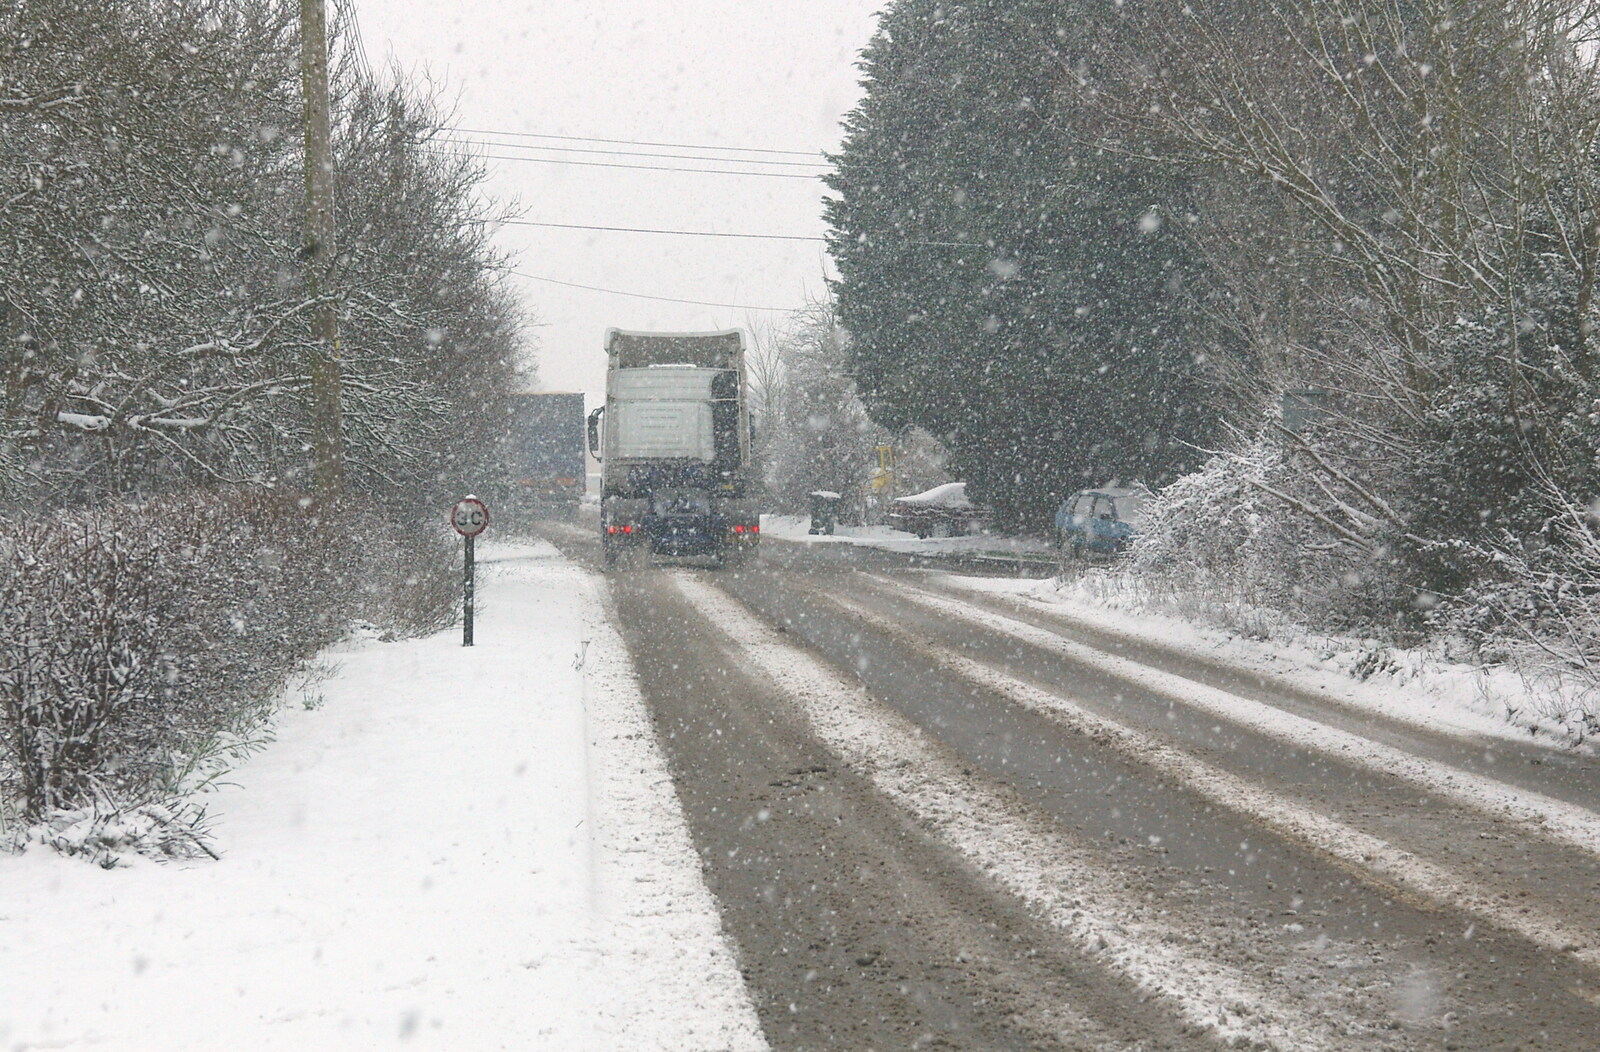 A heavy tractor unit negotiates the snow from Wendy Leaves "The Lab" and a Snow Day, Cambridge and Brome - 25th February 2005